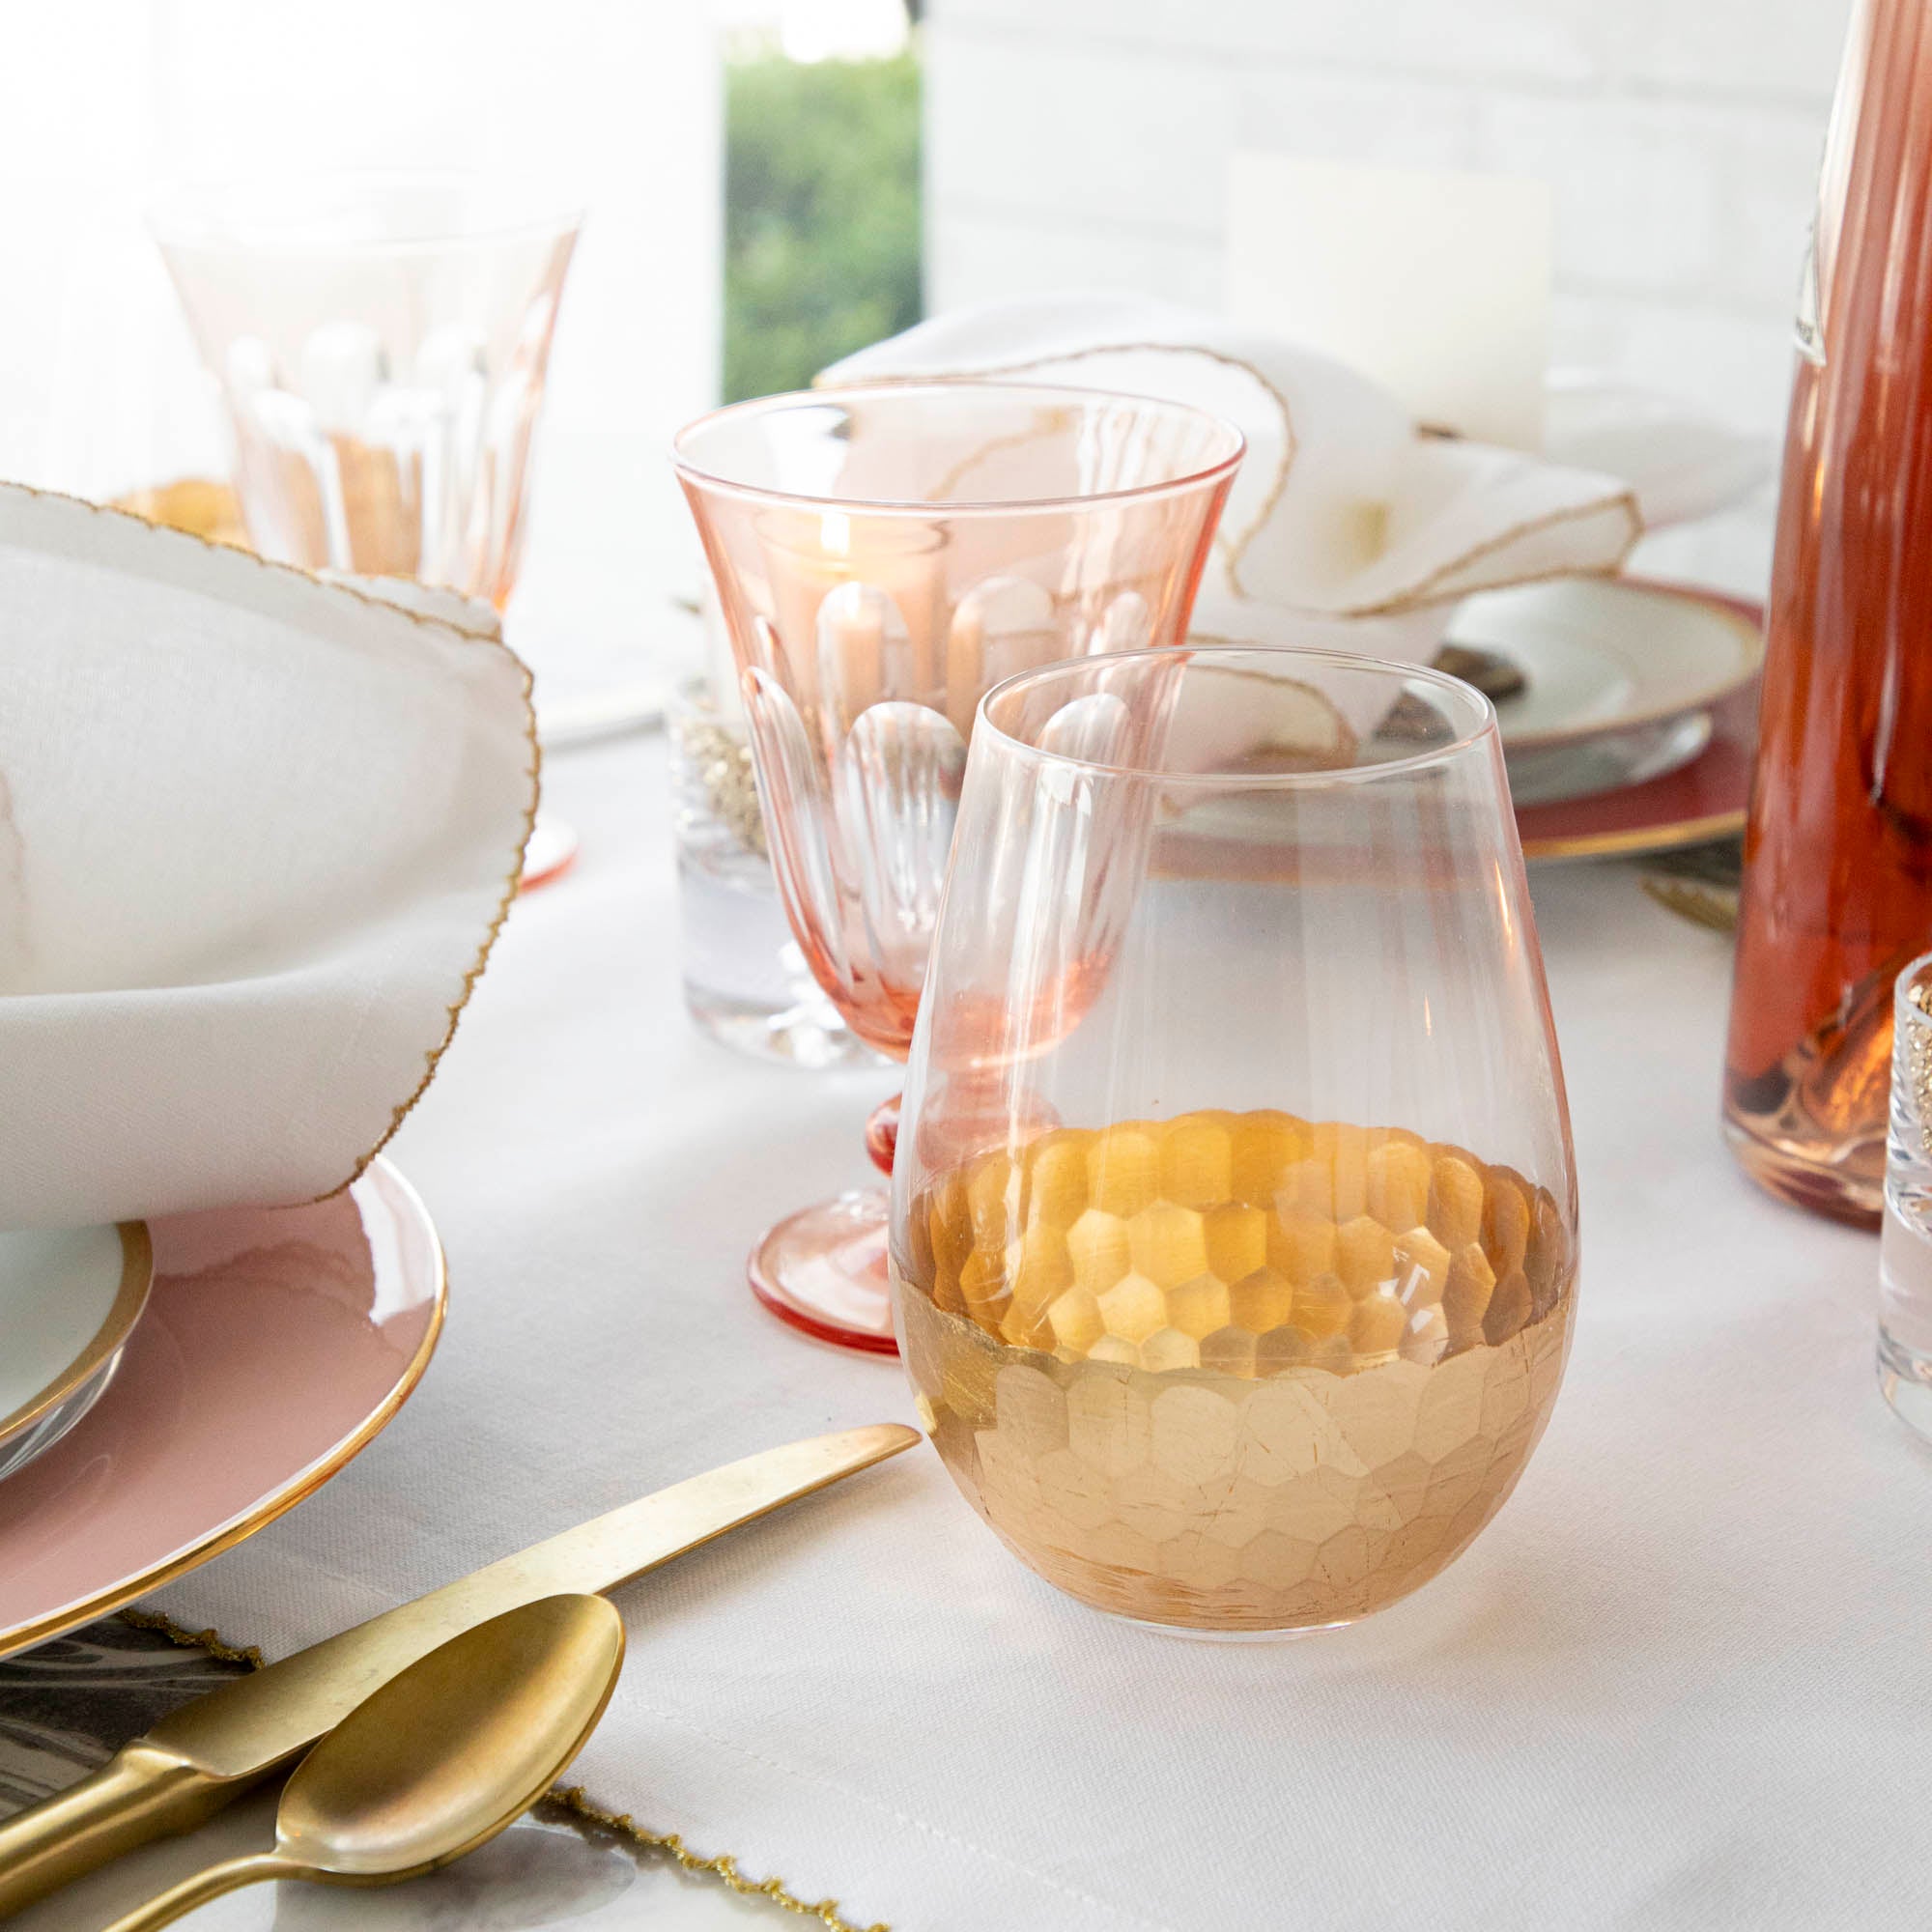 A table setting with Vitorrio Stemless Glassware plates, and napkins.